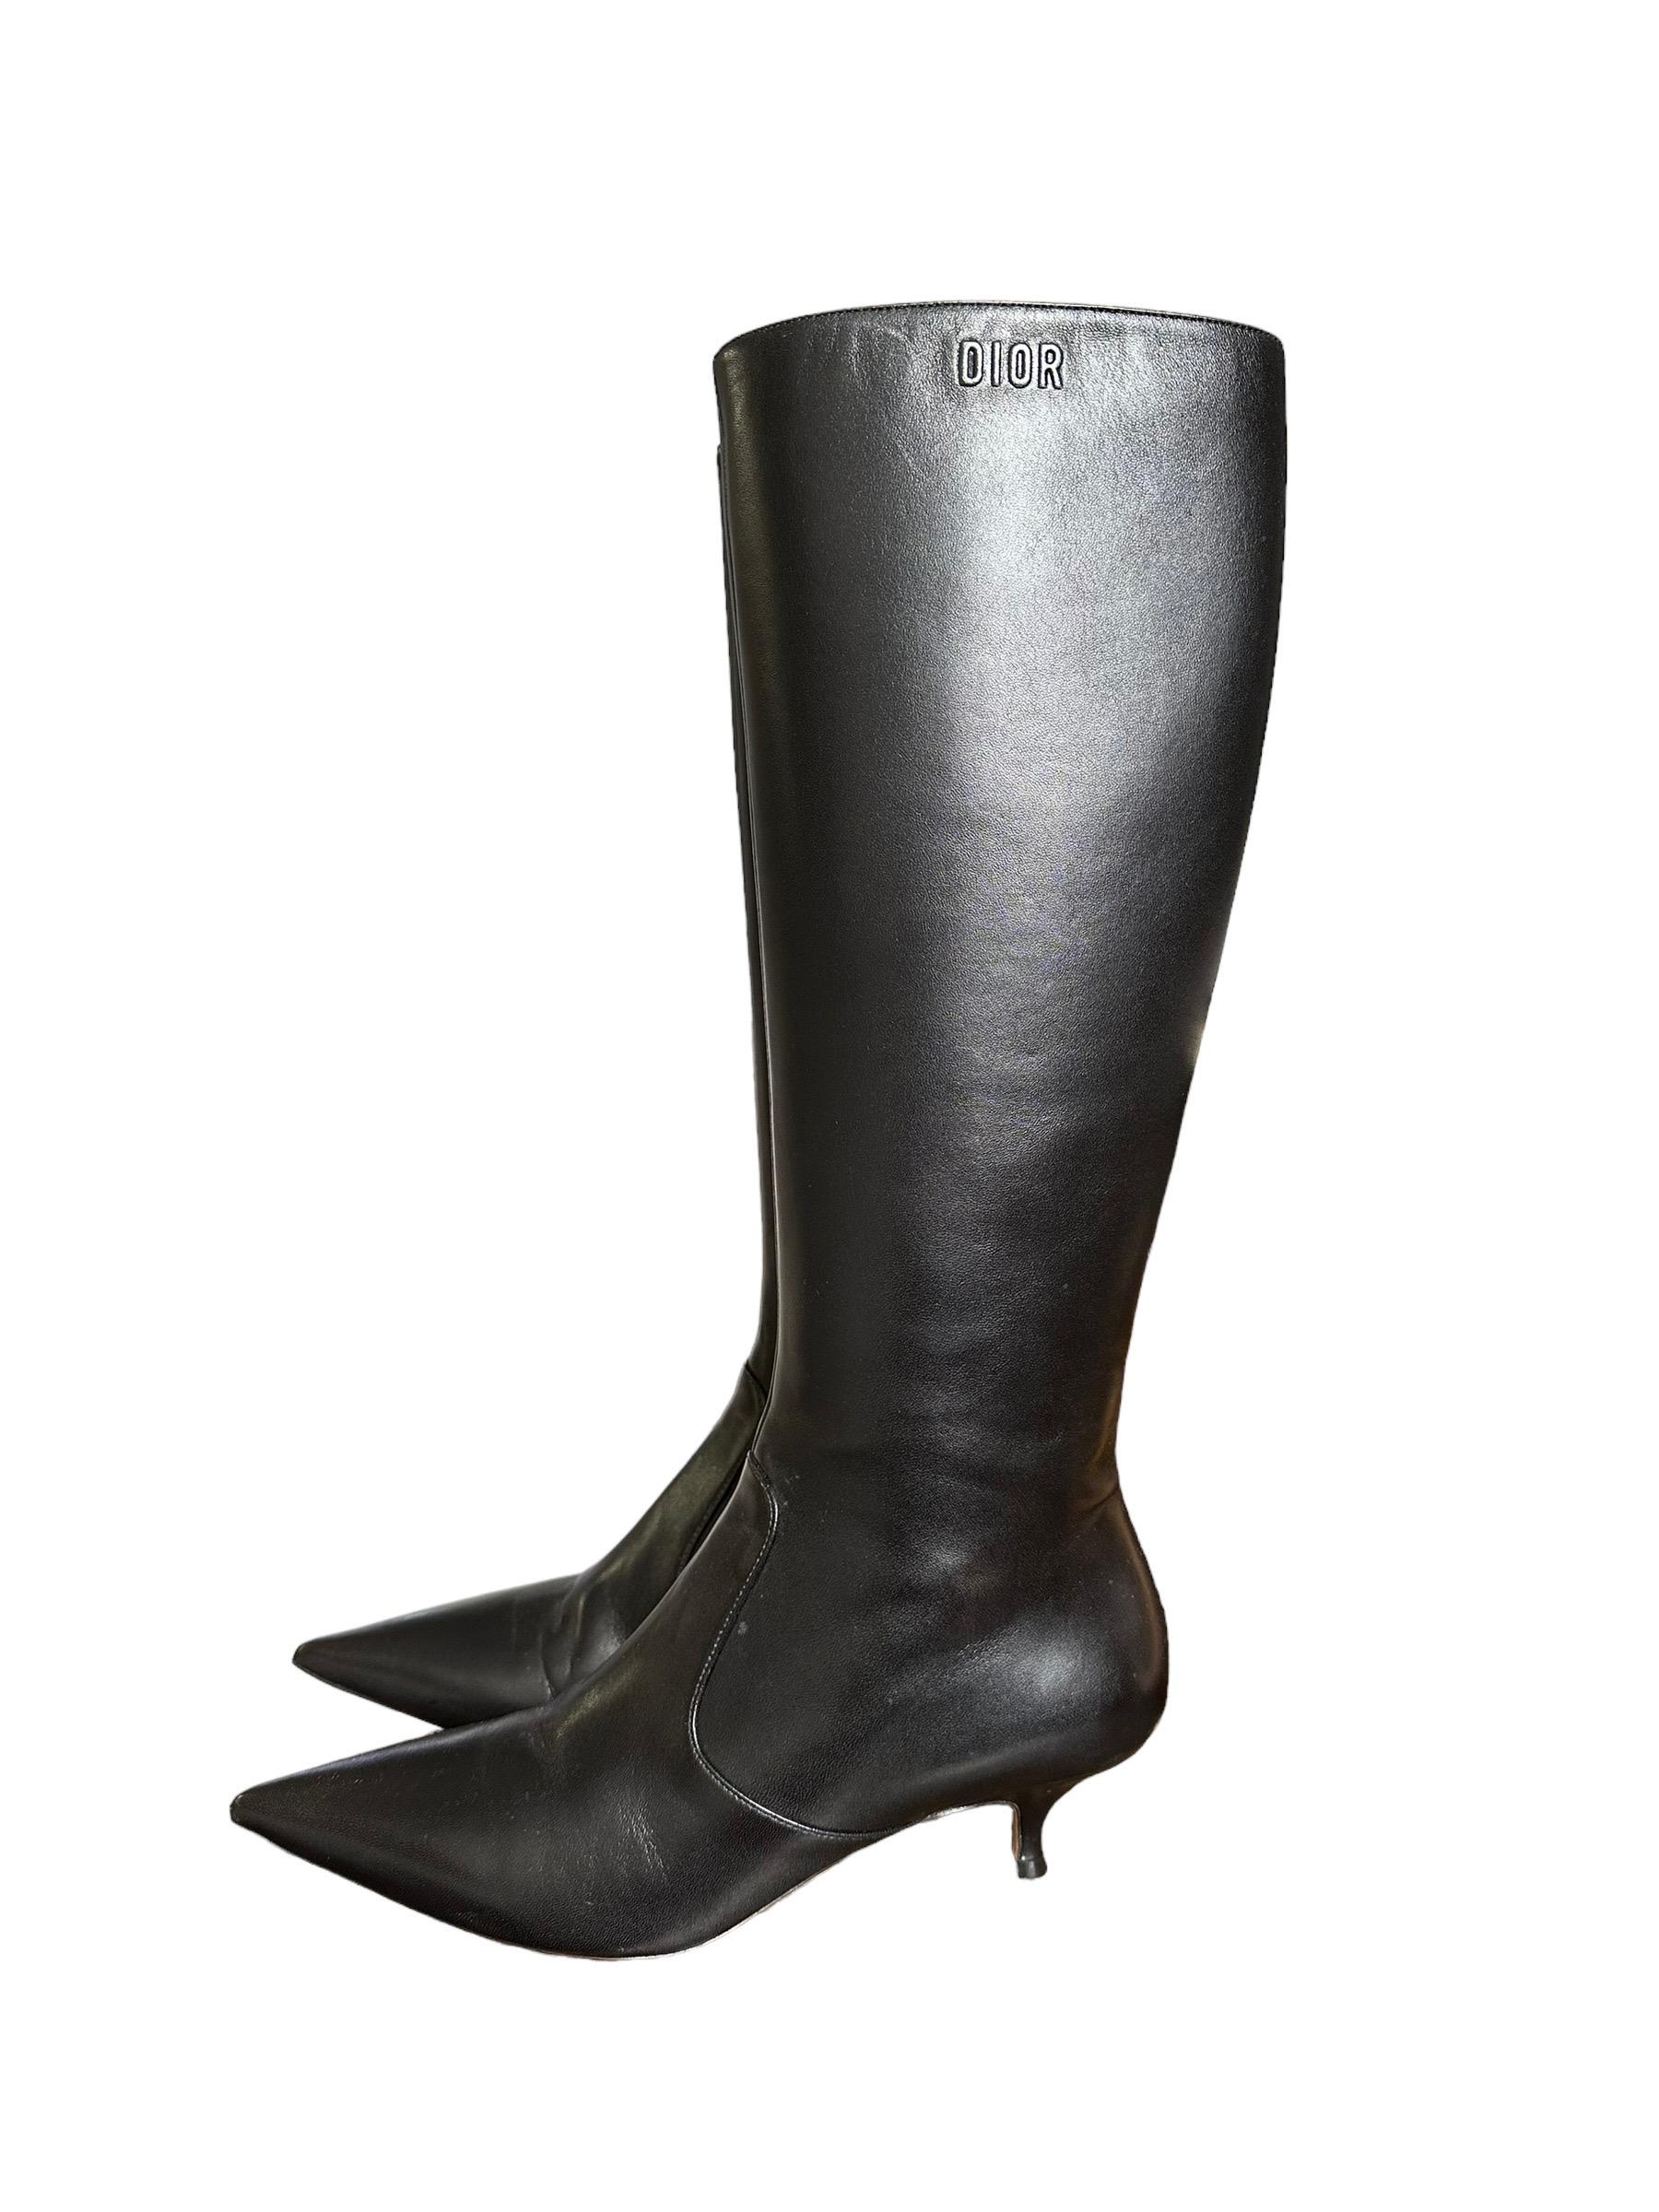 Dior designer boots, made in black smooth leather with silver hardware. Equipped with a side zip closure, internally lined in leather. Leg height 40cm; heel height 5 cm. Italian number 38, they come complete with box and dustbag, in like new